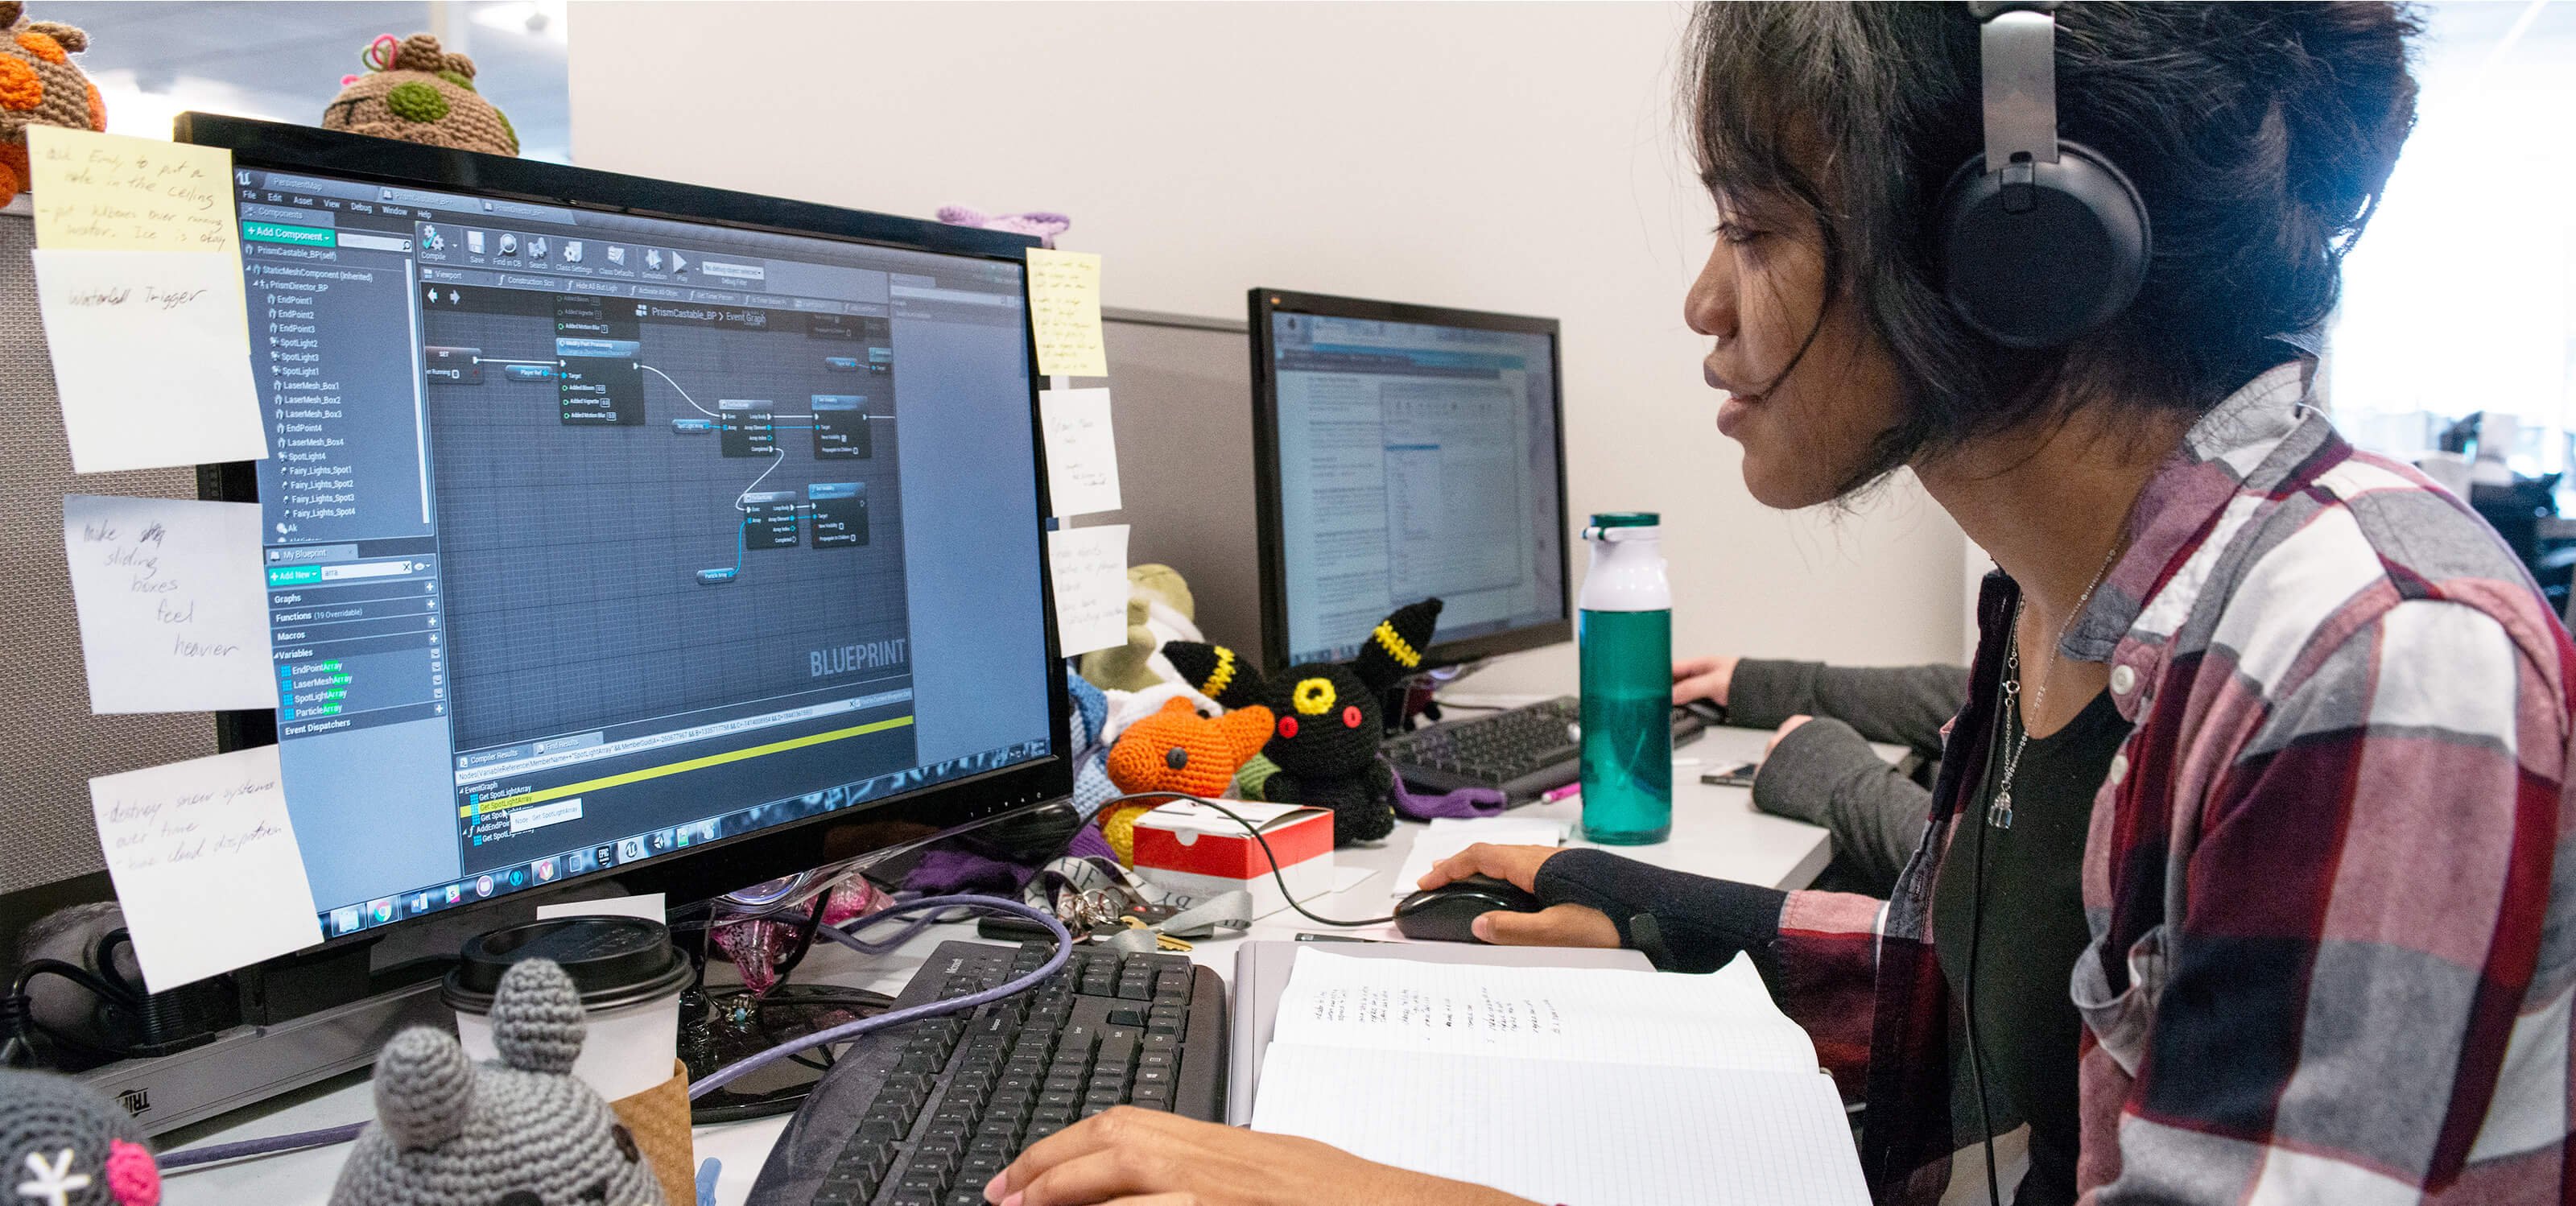 A DigiPen game design student works on her computer surrounded by knit plush toys.